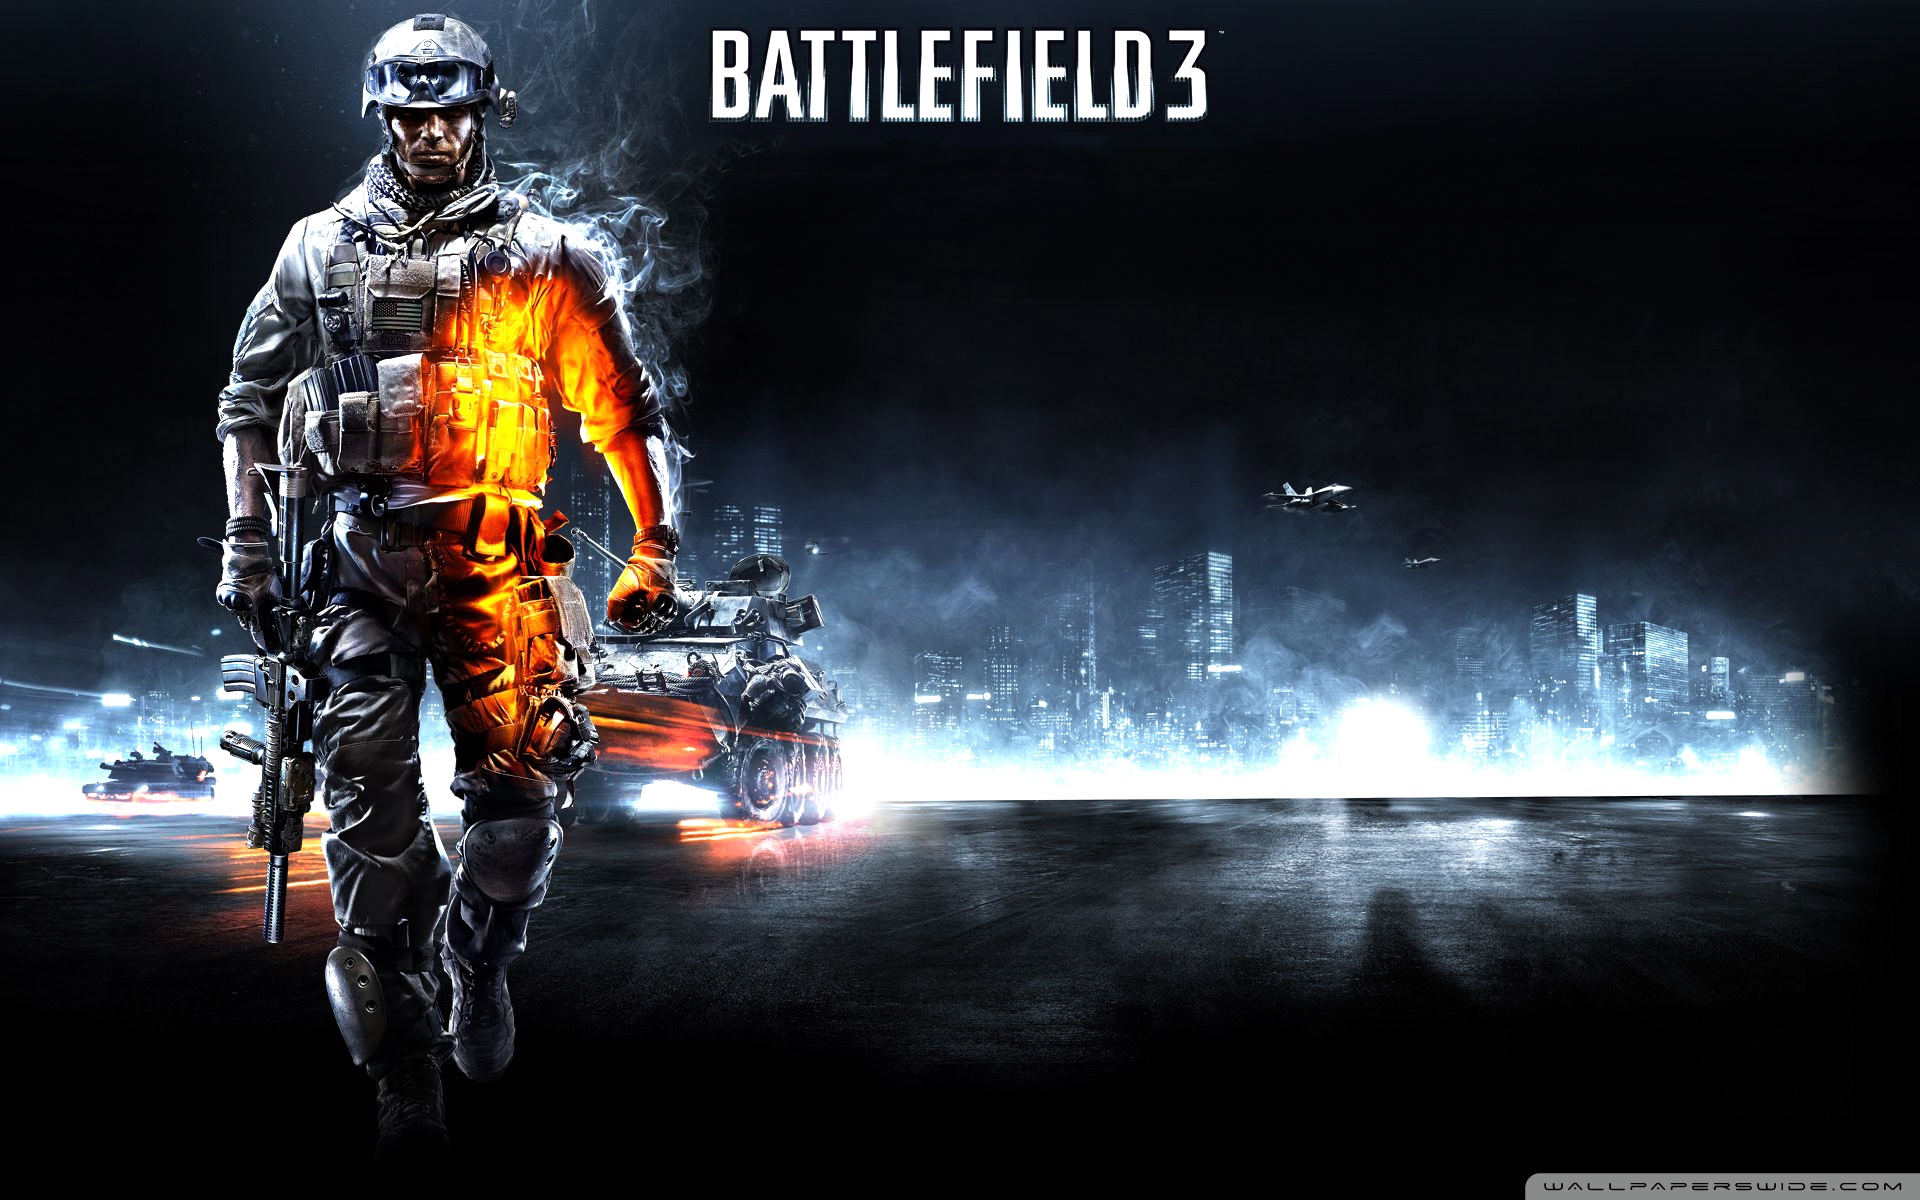 battlefield 3 wallpaper hd,pc game,action adventure game,movie,action figure,poster